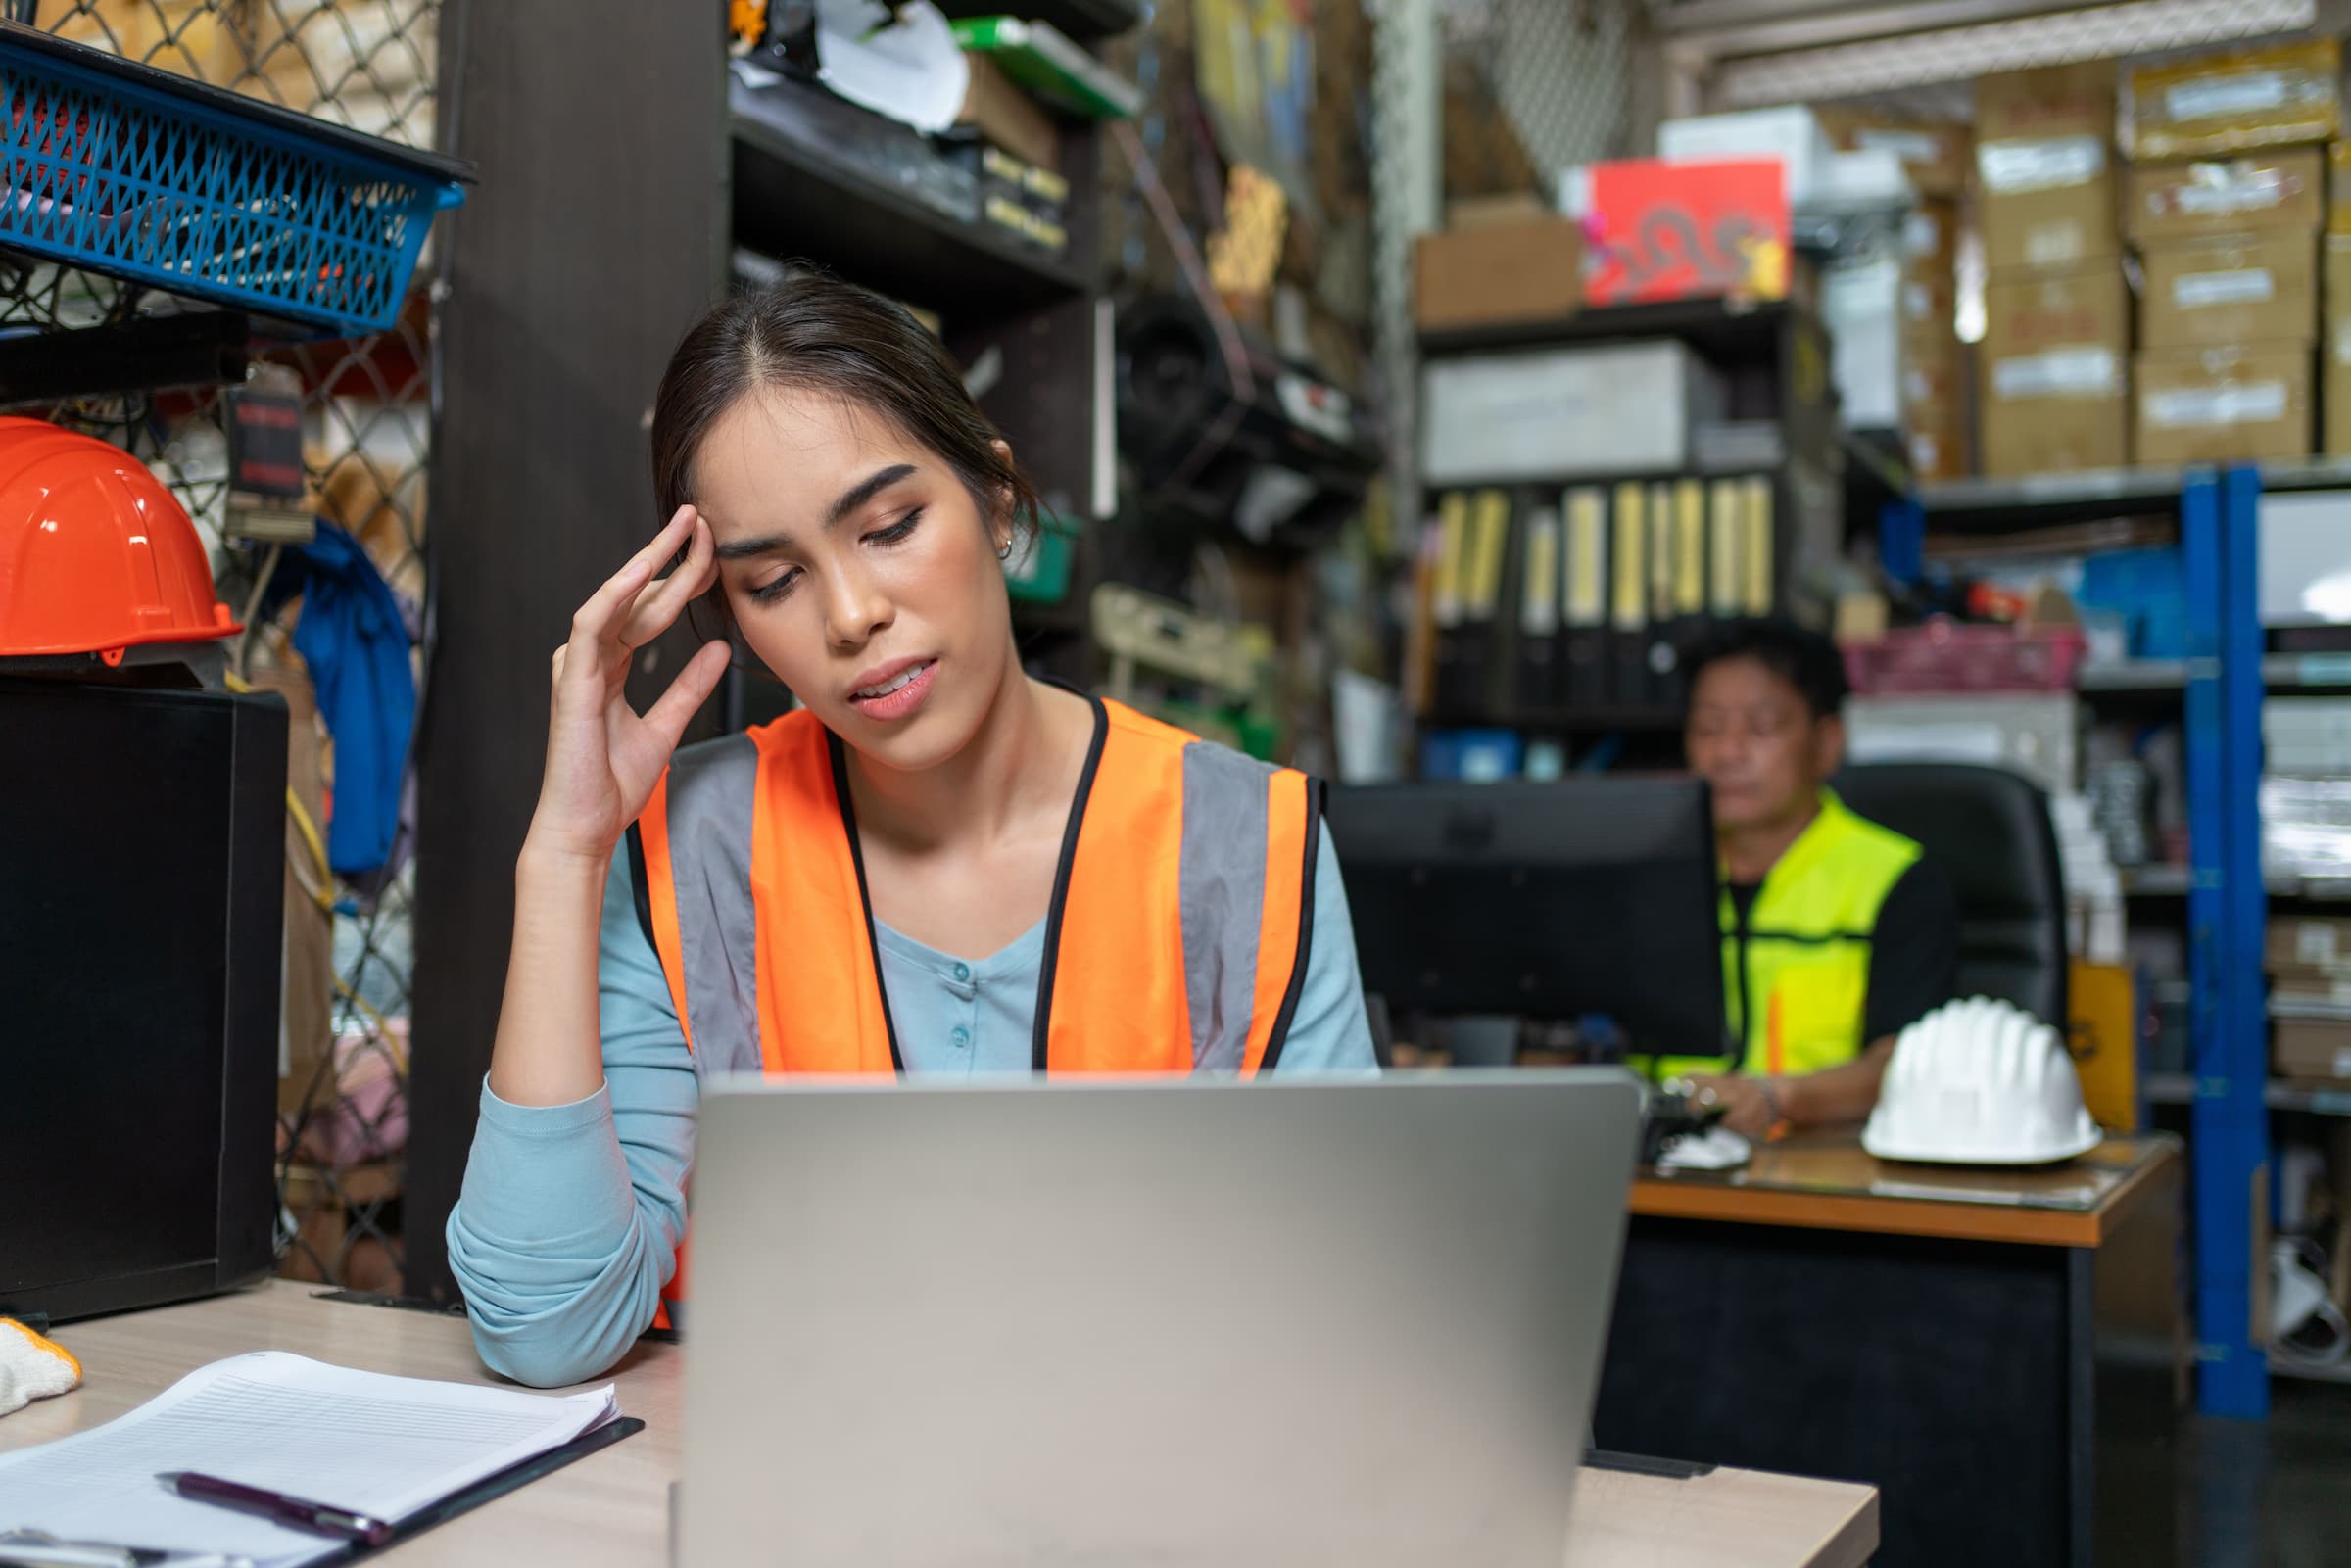 woman in safety vest looks at computer in frustration